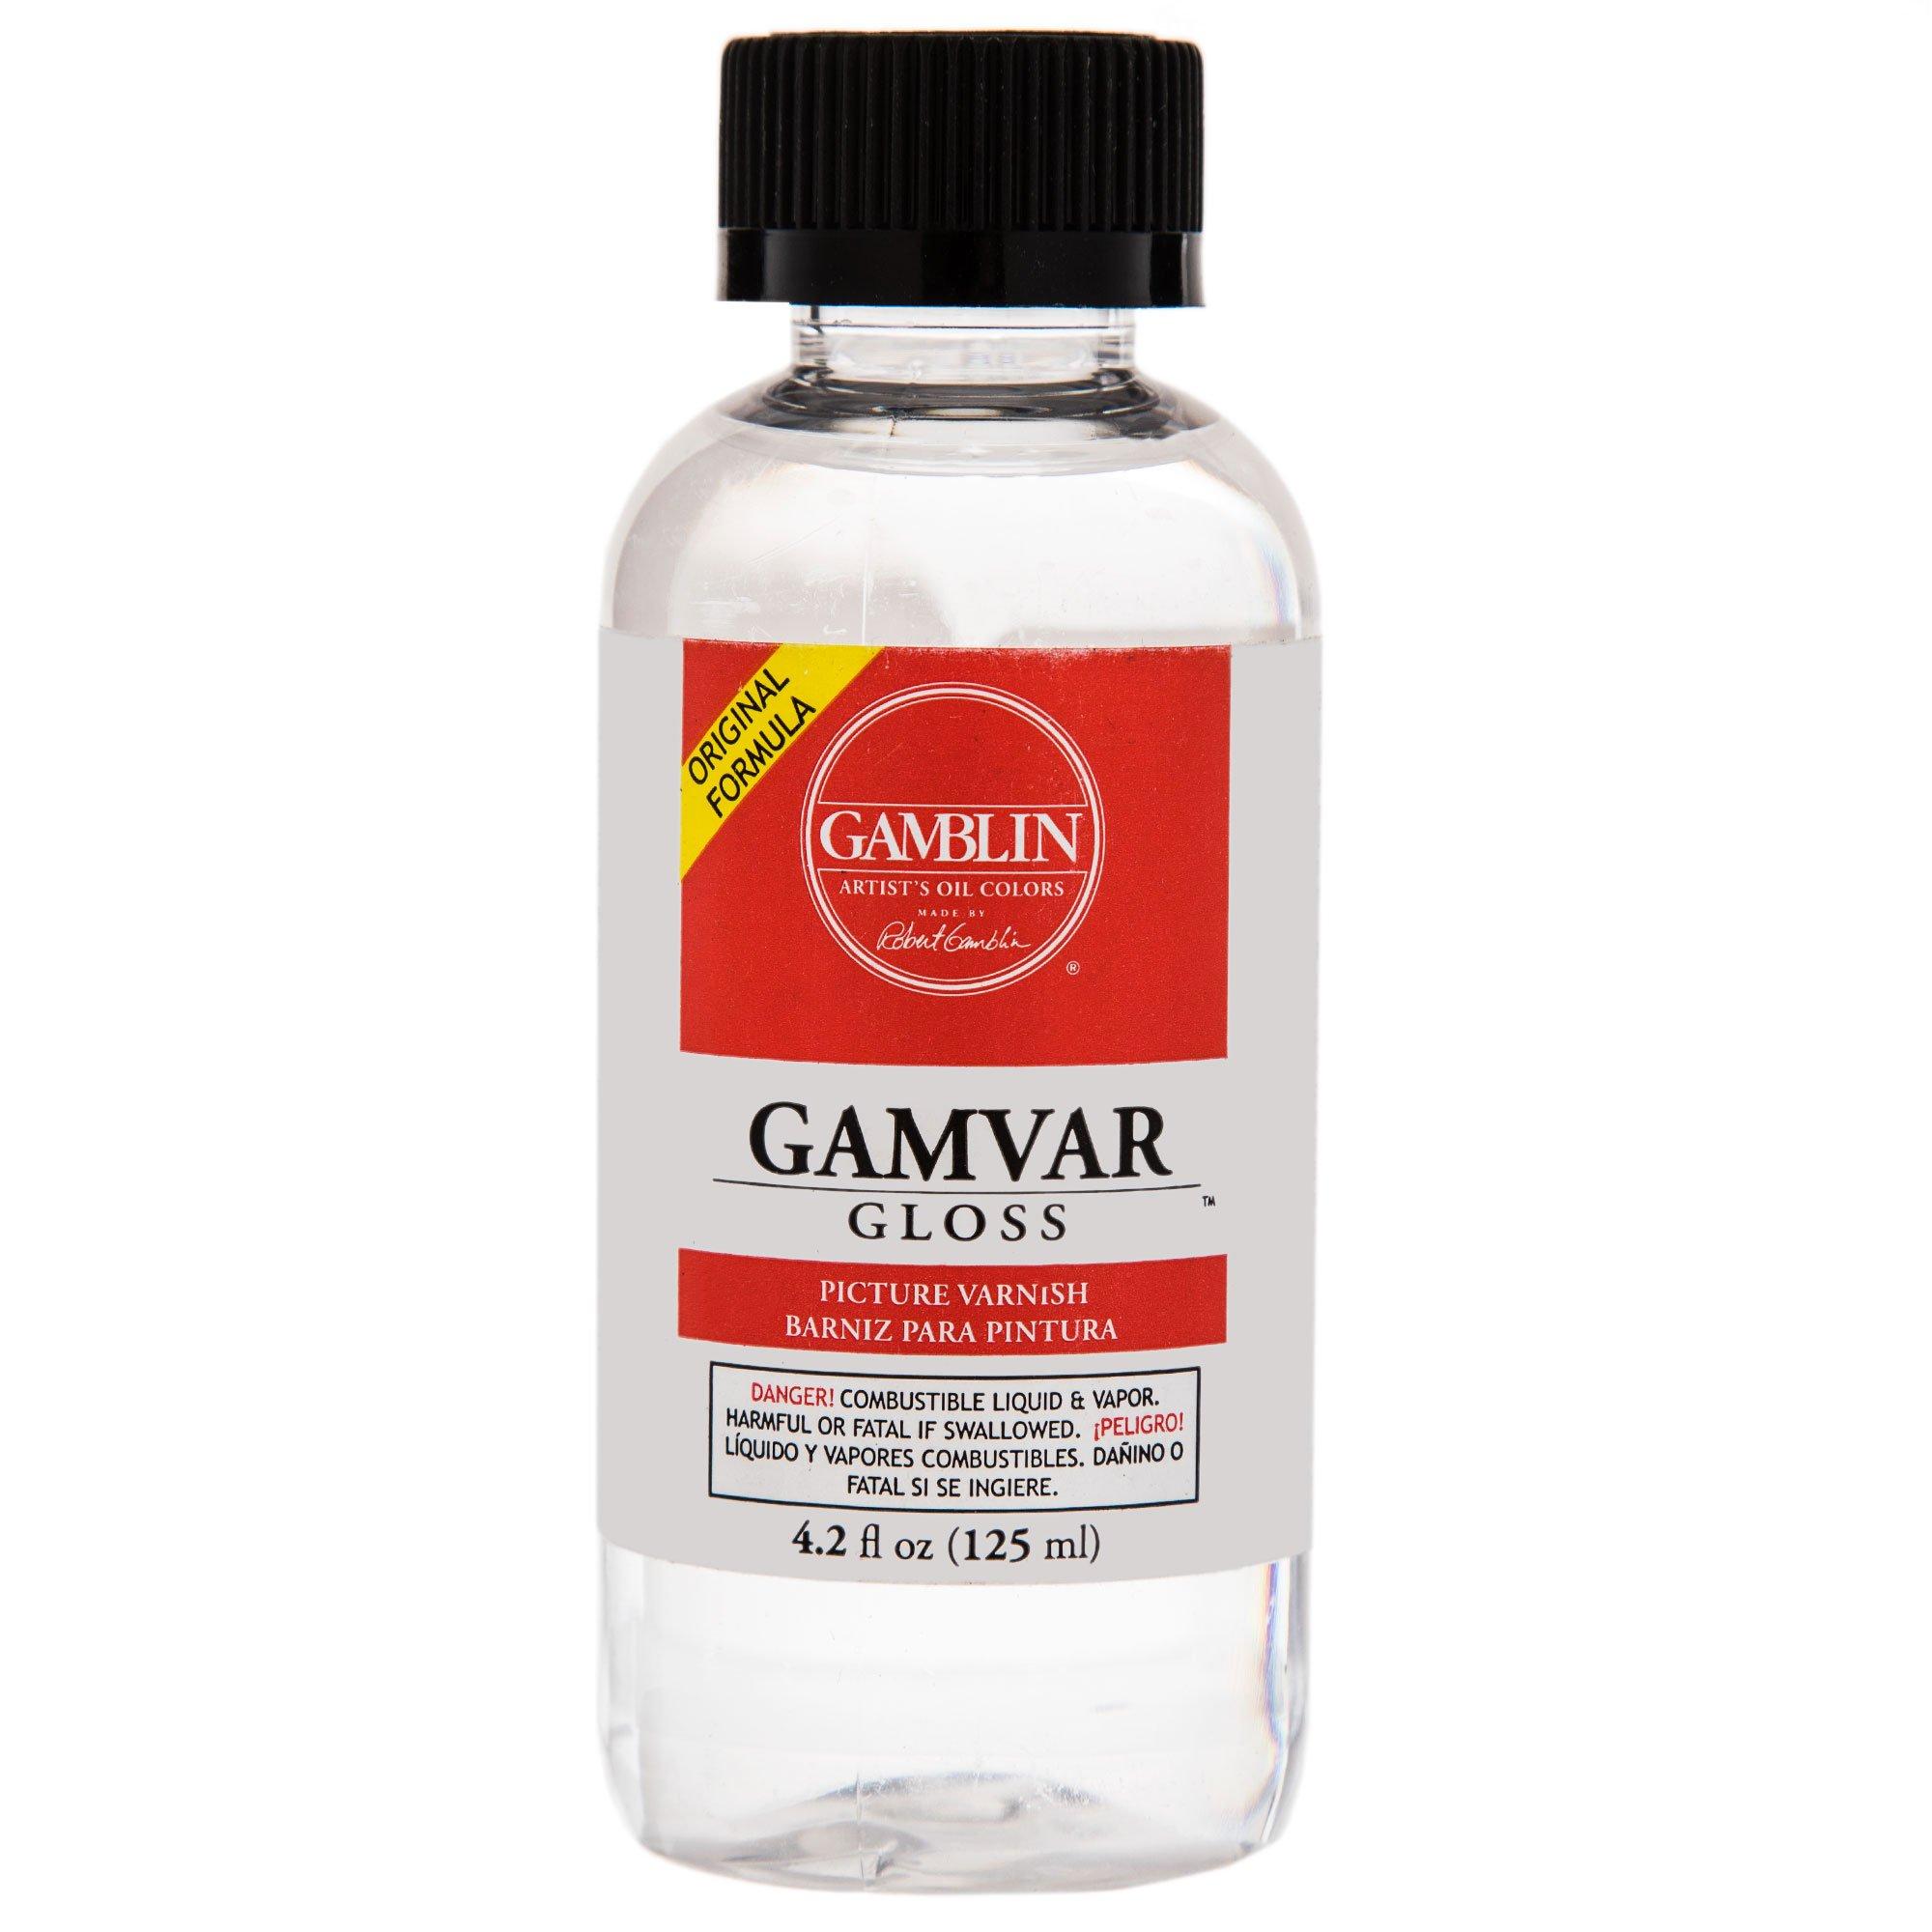 JSK Art Supplies - Give your paintings new life with this gamvar gloss  varnish.